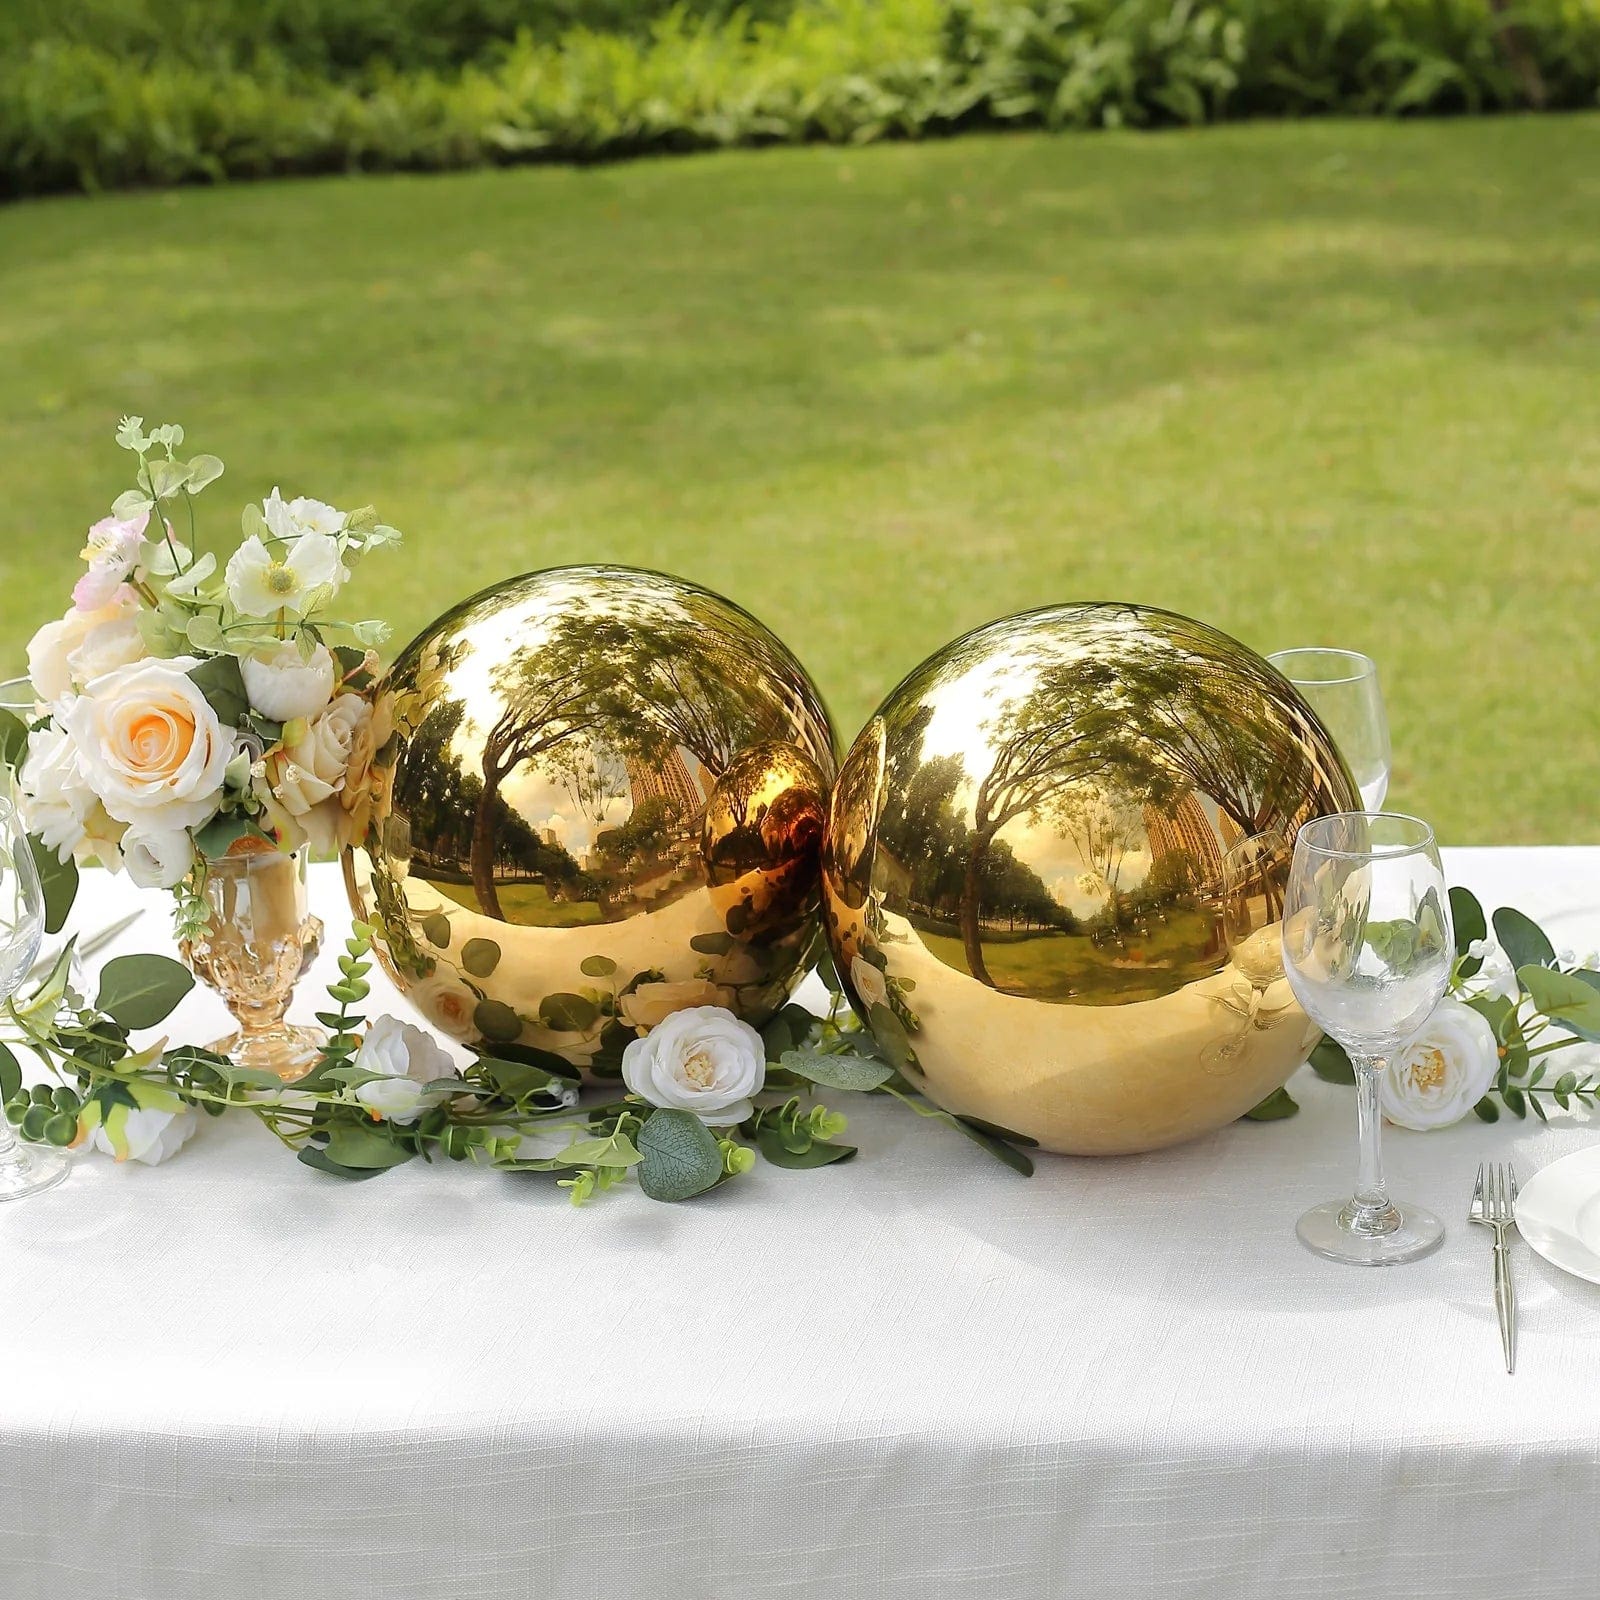 2 Stainless Steel 12 in Globe Gazing Reflective Mirror Ball